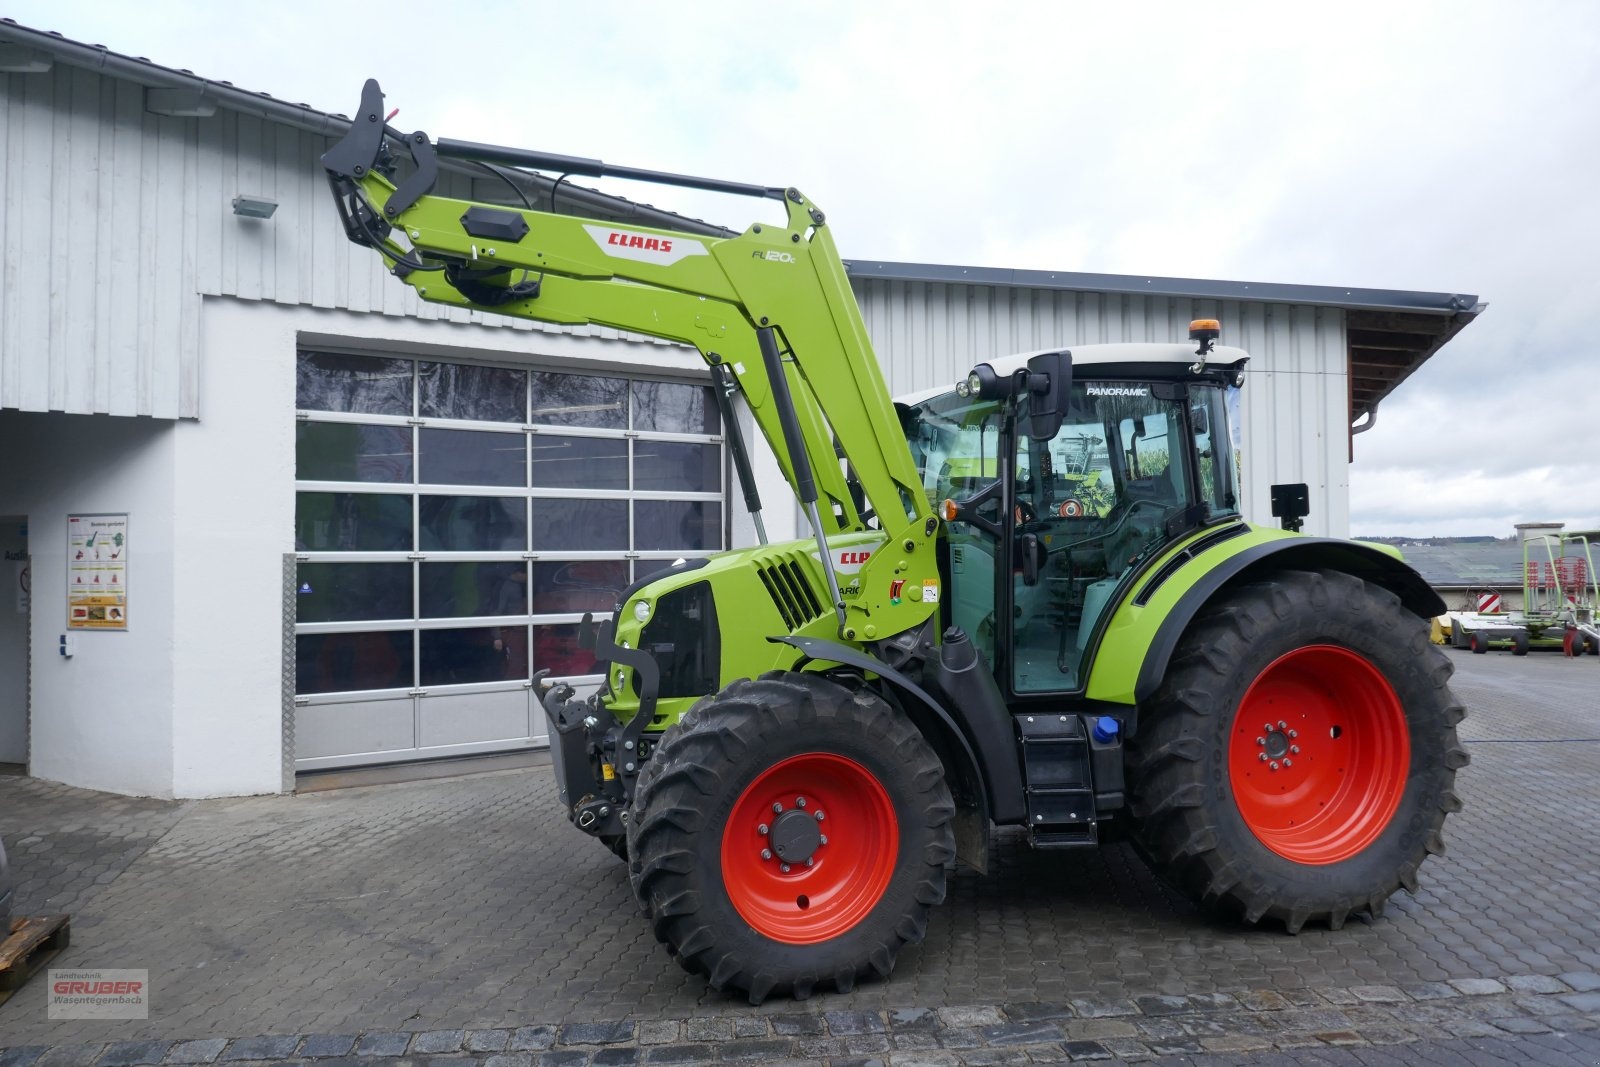 Claas arion 470 cis panoramic inkl. fl120c tractor €105,000